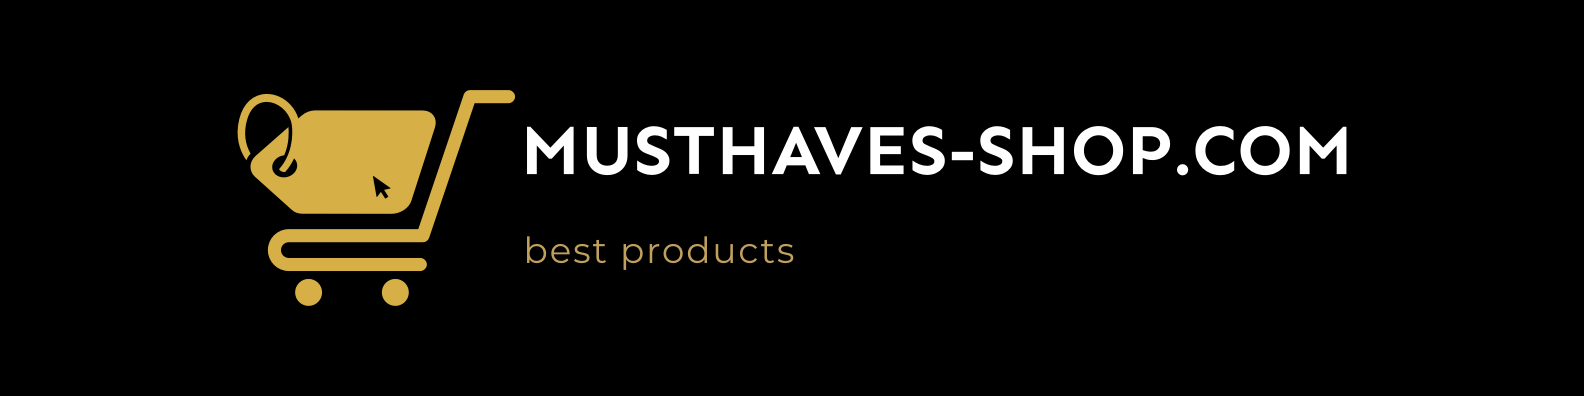 Must Haves Products – musthaves-shop